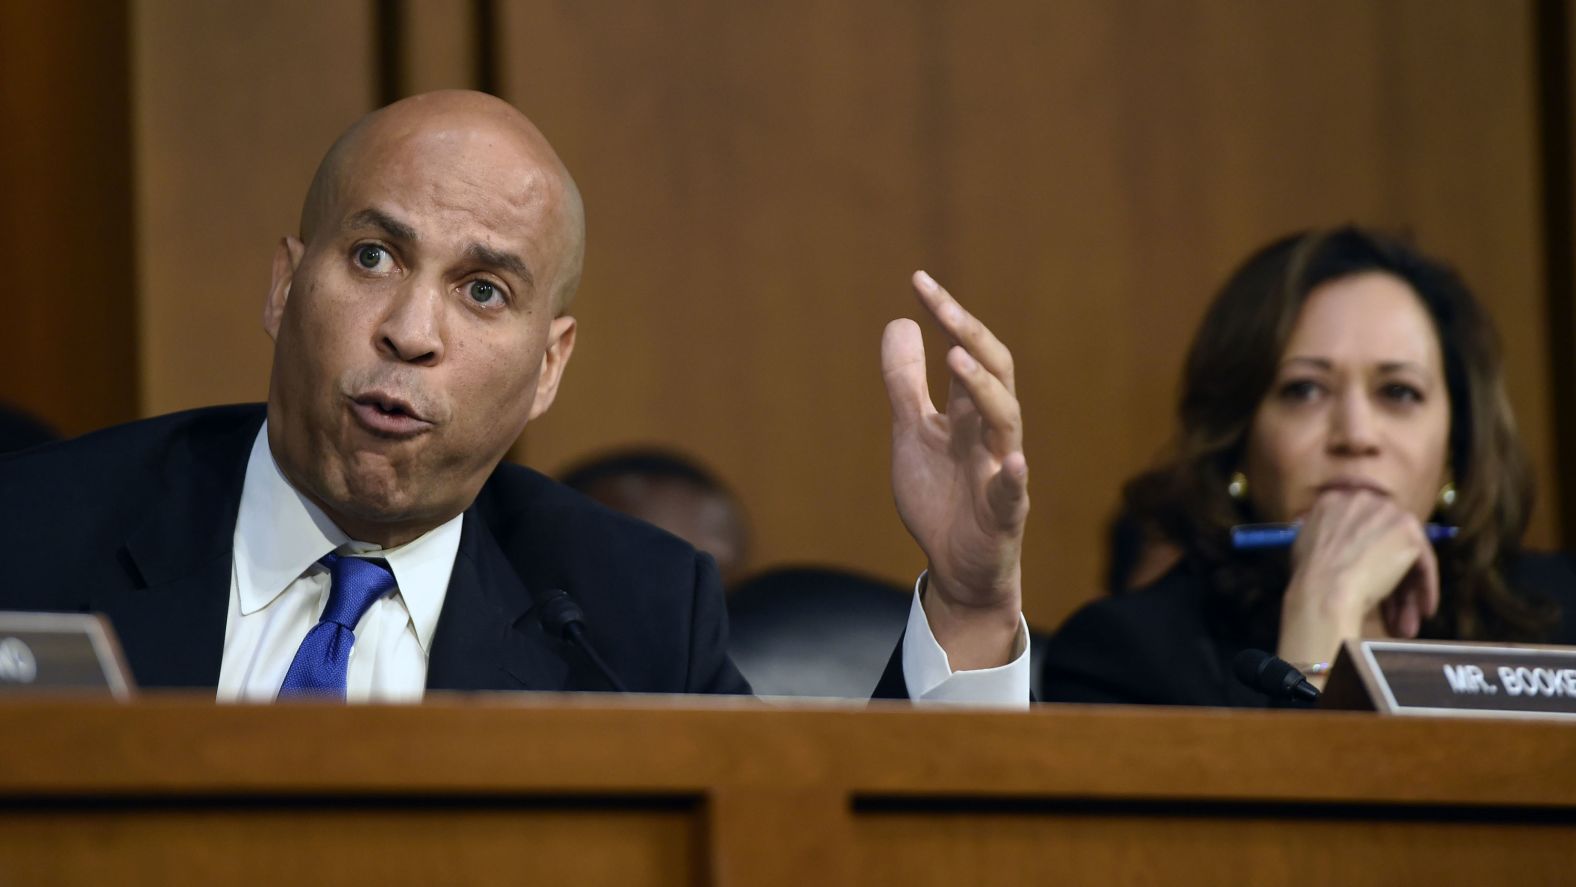 Senate Democrats -- including Cory Booker, left, and Kamala Harris -- <a href="https://www.cnn.com/2018/09/04/politics/brett-kavanaugh-supreme-court-senate-hearing/index.html" target="_blank">disrupted the start of Tuesday's hearing,</a> saying they haven't had adequate time to review 42,000 documents that were released Monday night regarding Kavanaugh's service in the George W. Bush White House.